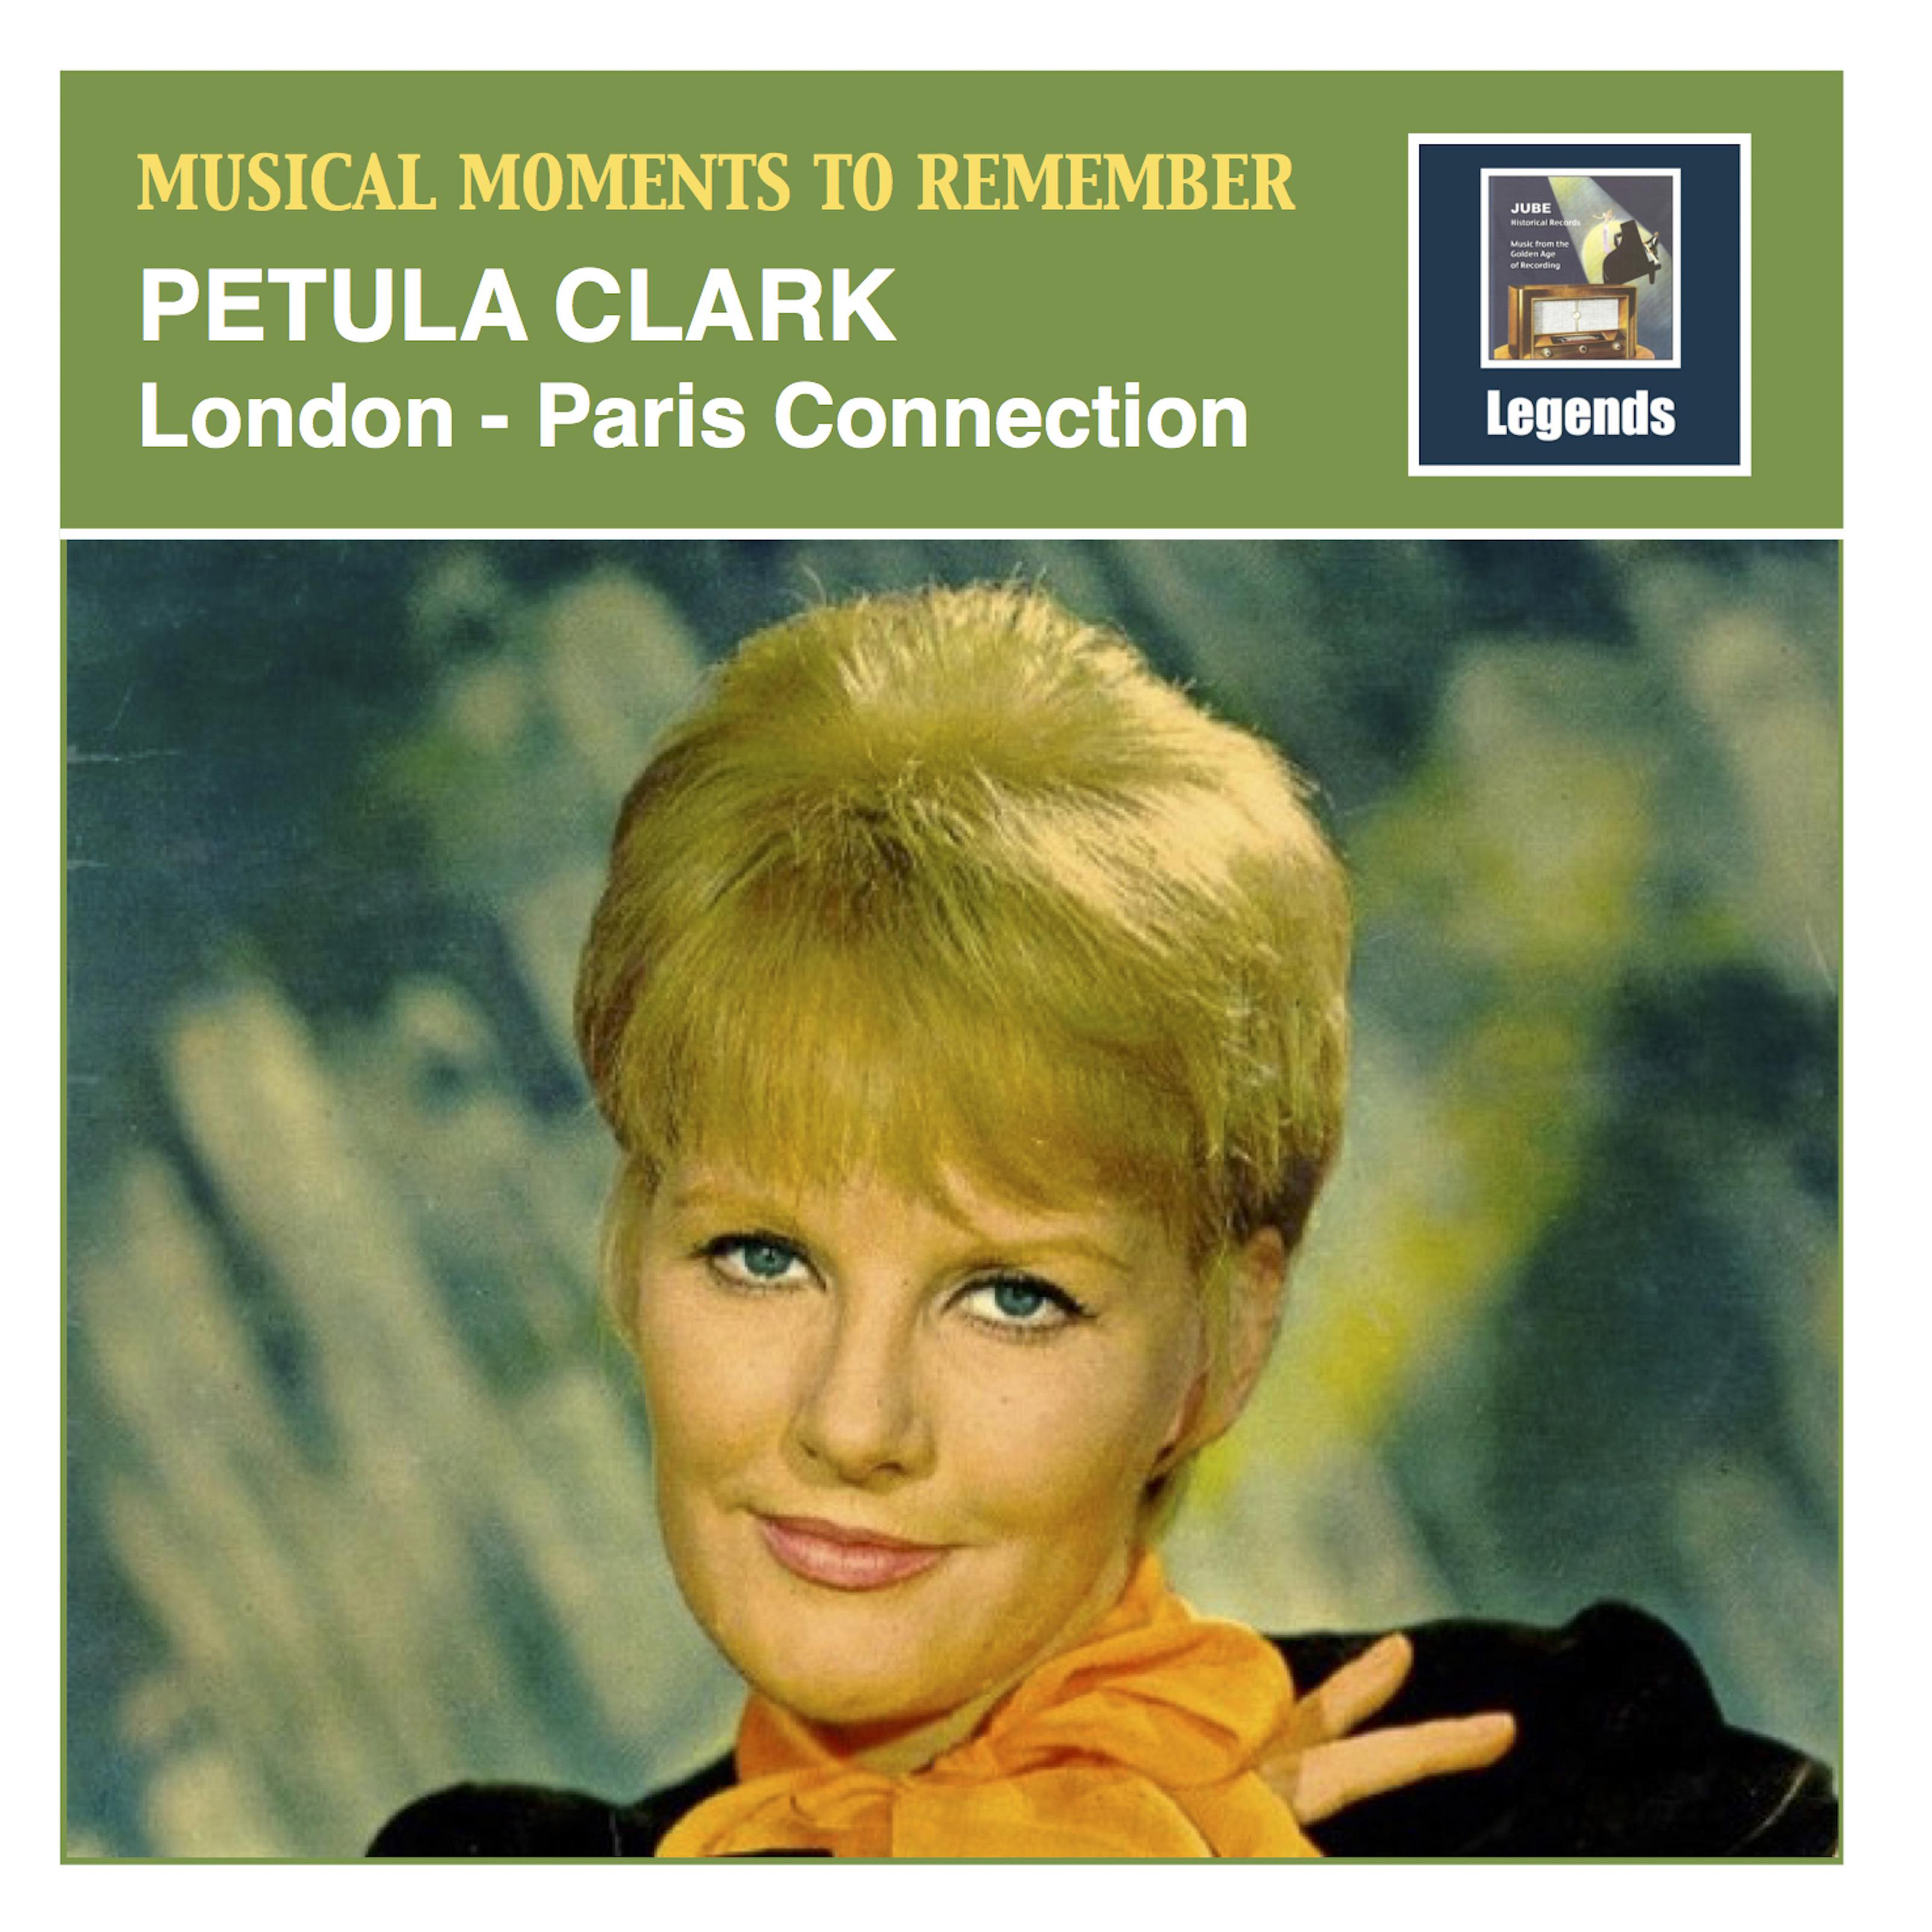 Musical Moments to Remember: Petula Clark — "London-Paris Connection" (Remastered 2018)